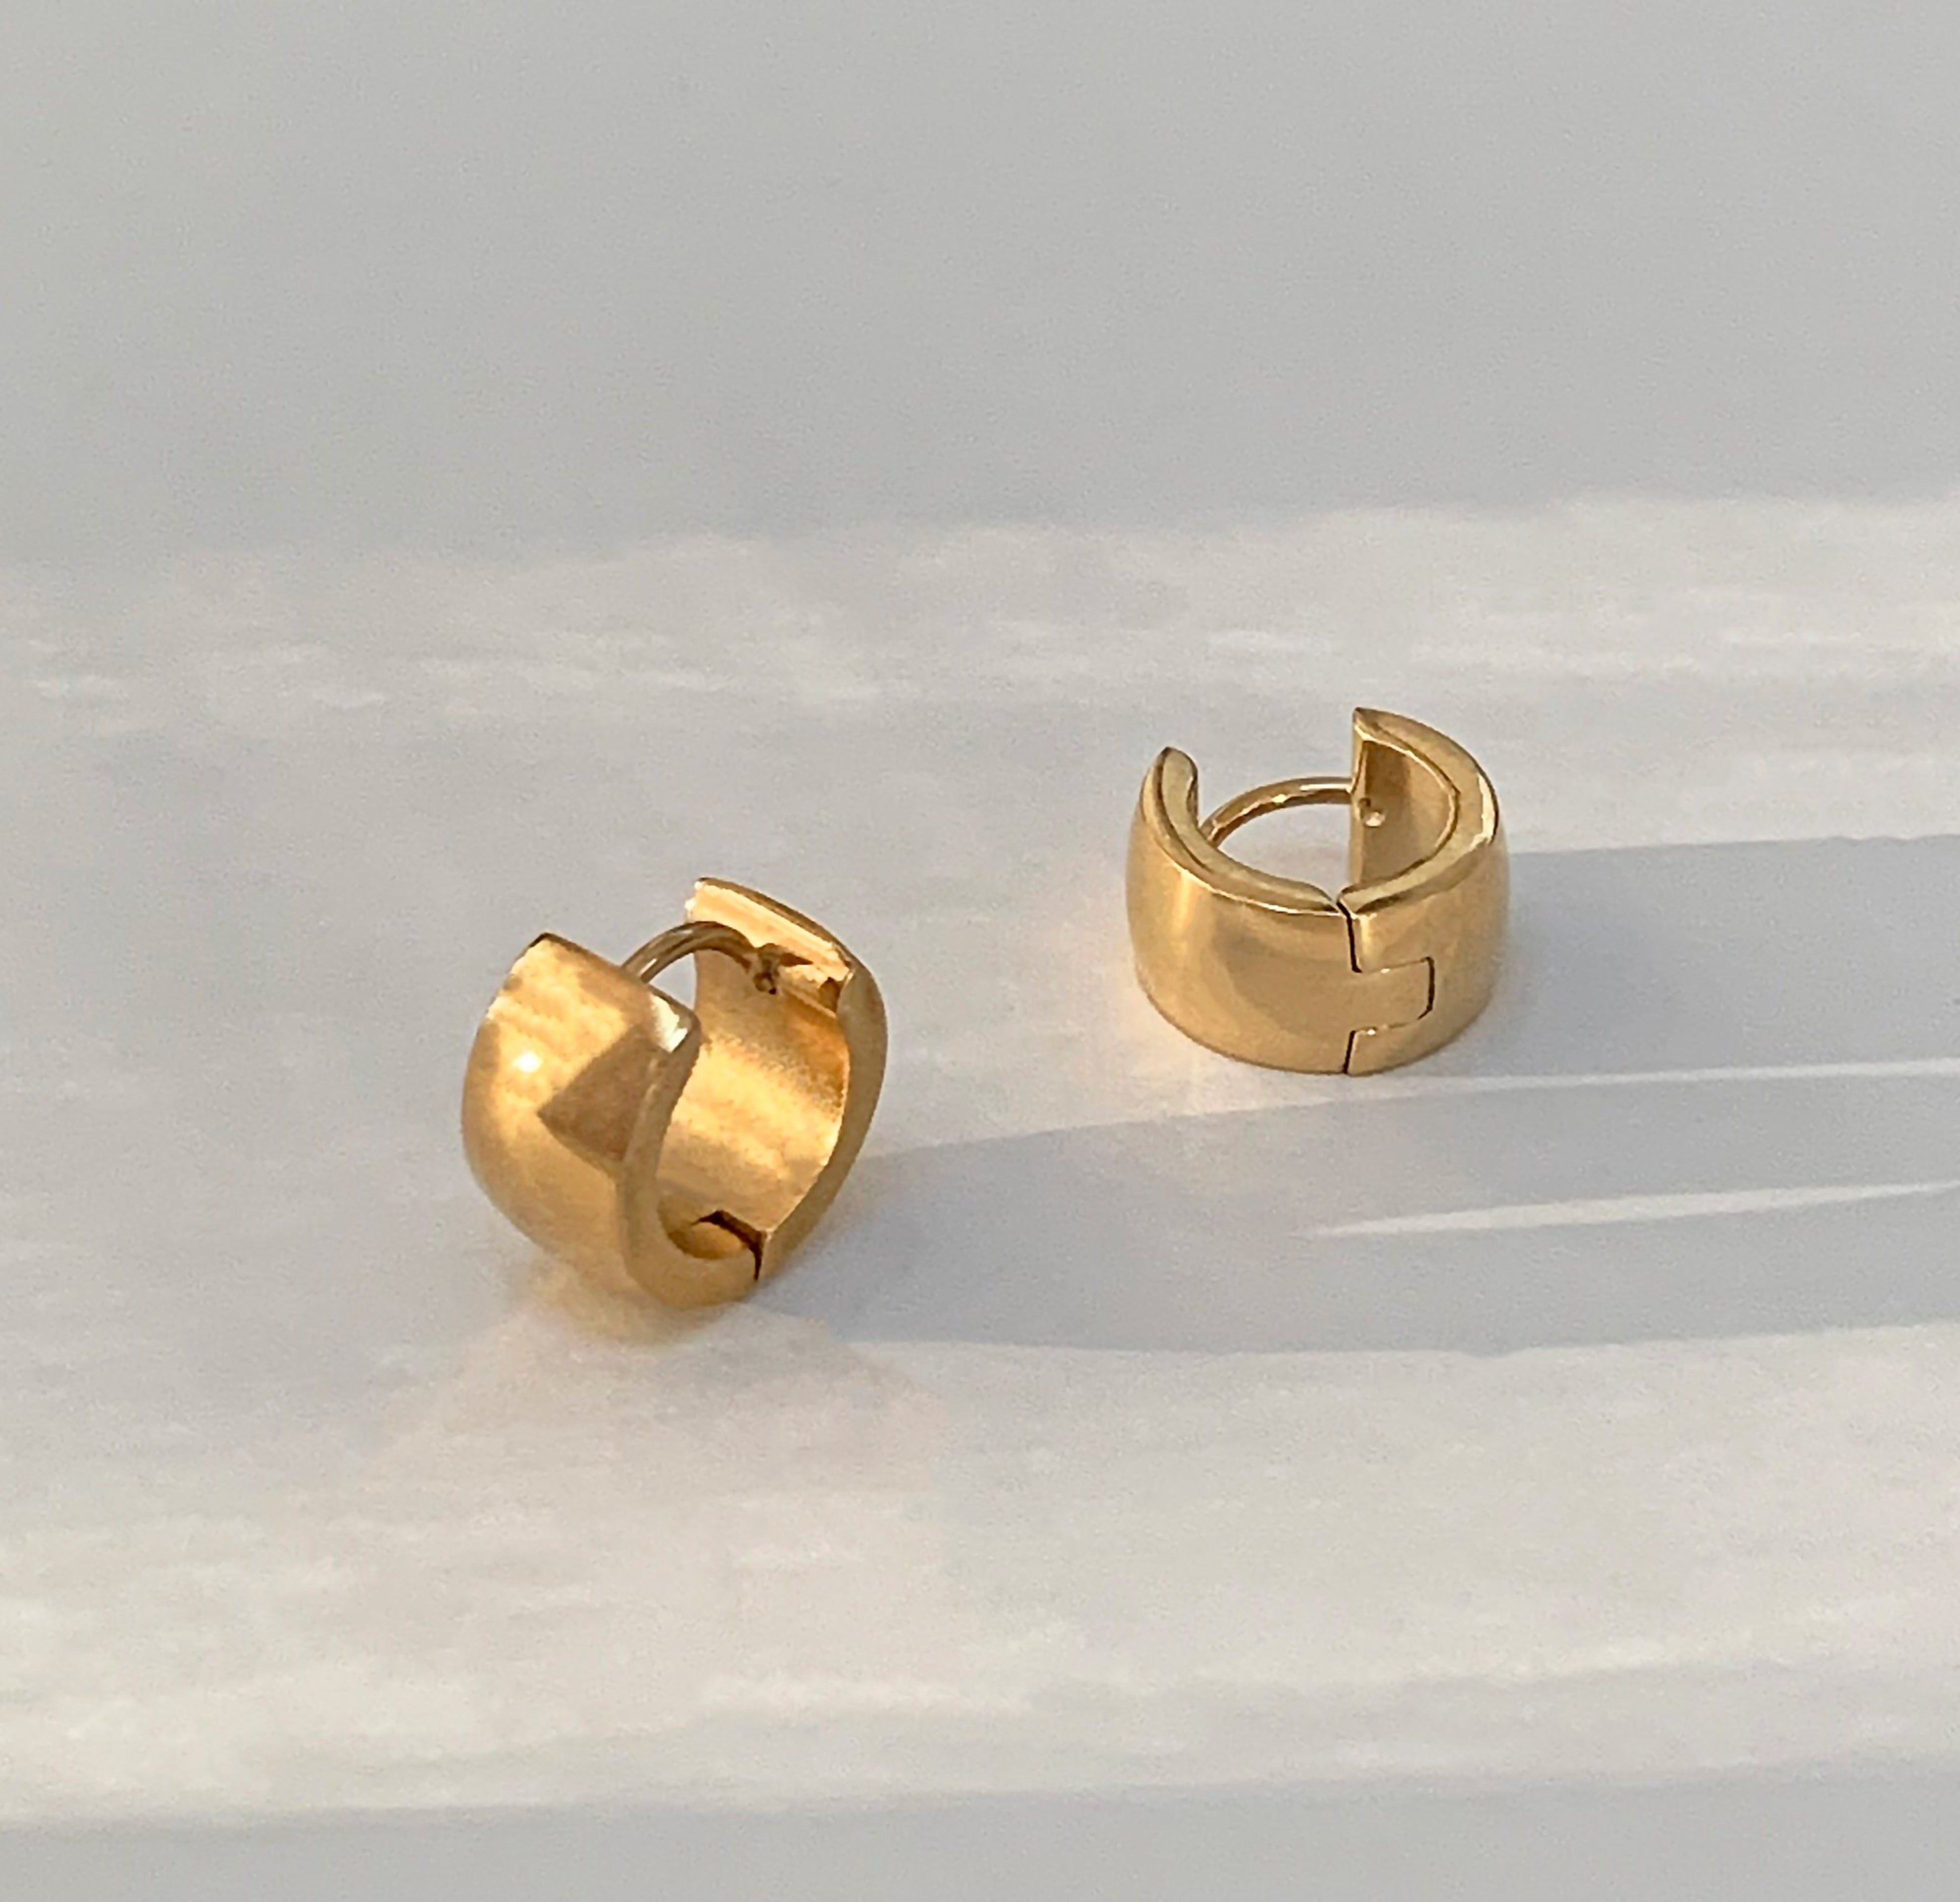 thich gold huggie earrings